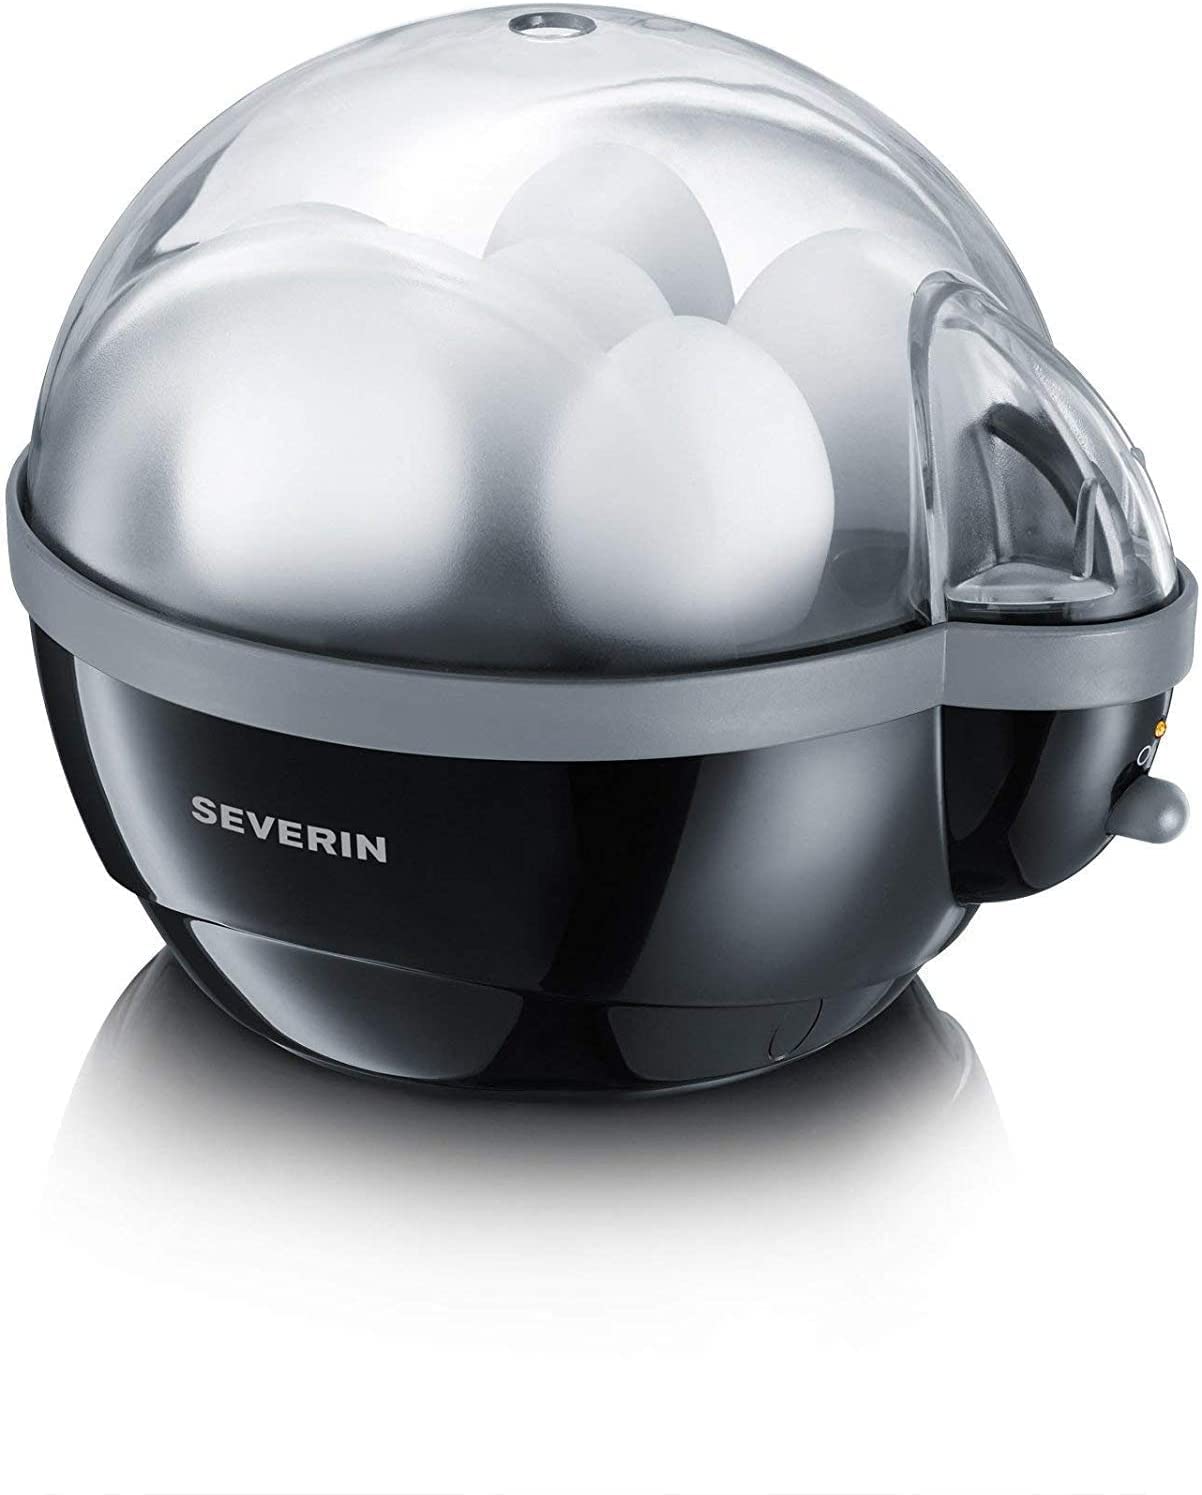 SEVERIN Egg Boiler for 6 Eggs, Includes Measuring Cup with Egg Picker, Egg Cooker with Beep After Cooking Time, Black, Approx. 420 W, EK 3165